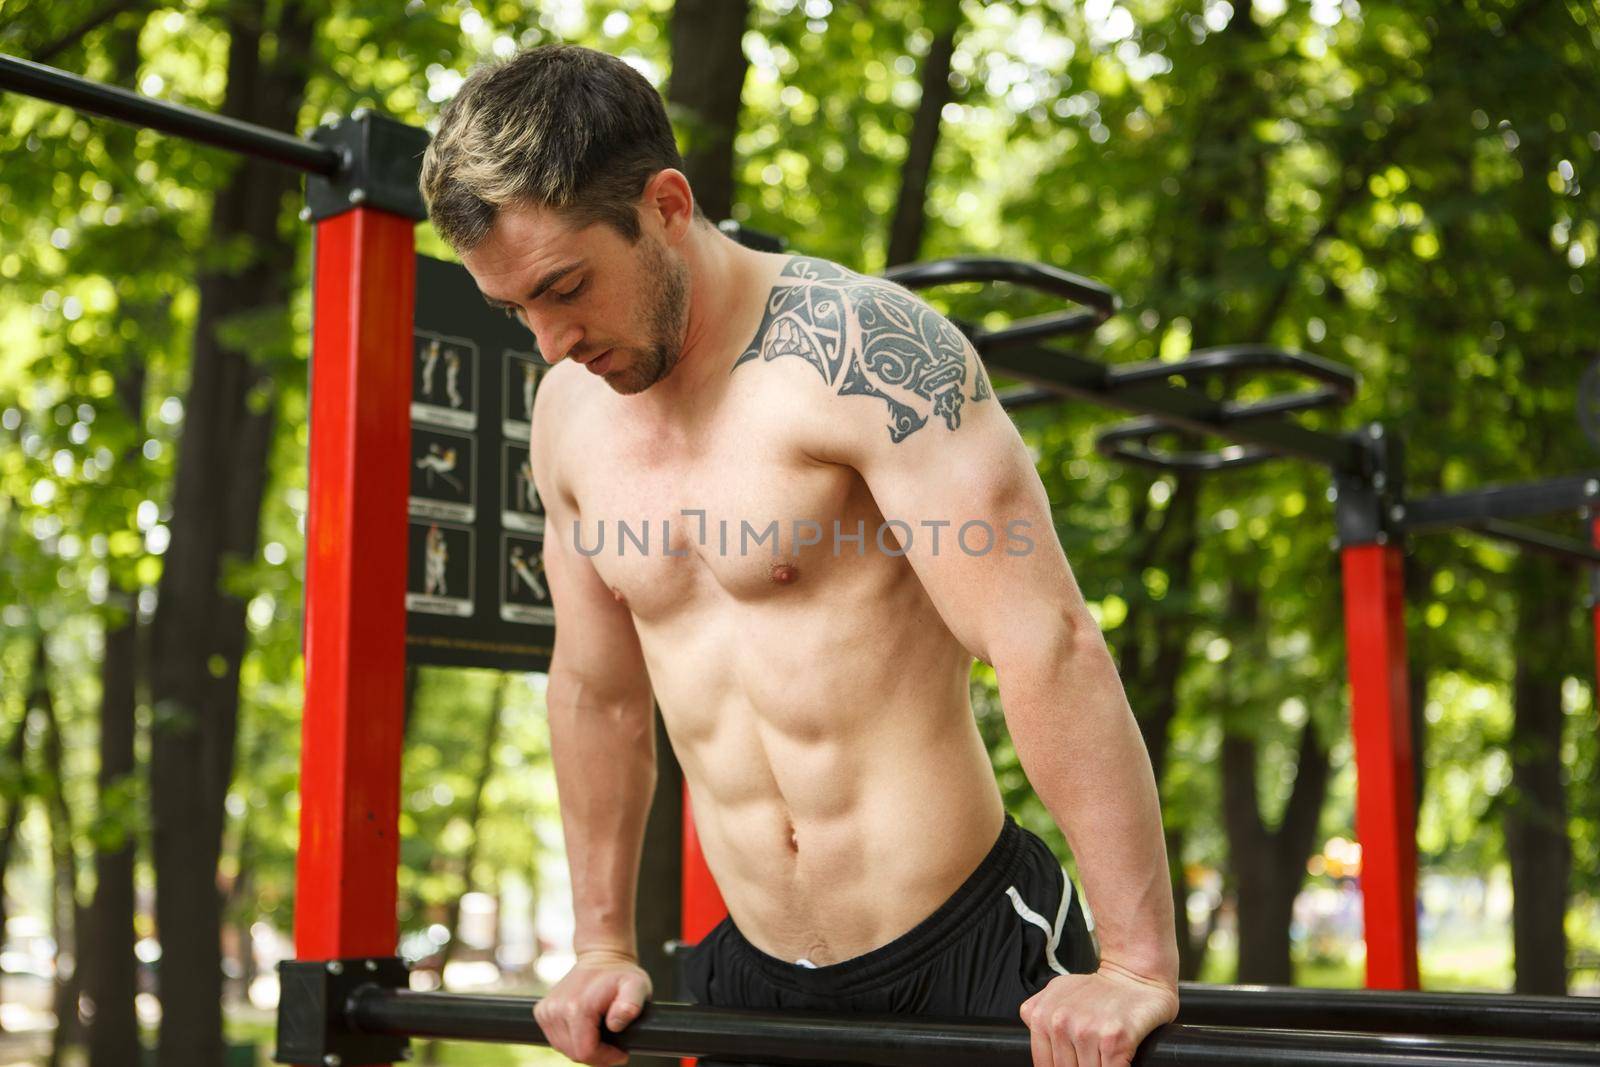 Shirtless male athlete with ripped torso exercising outdoors